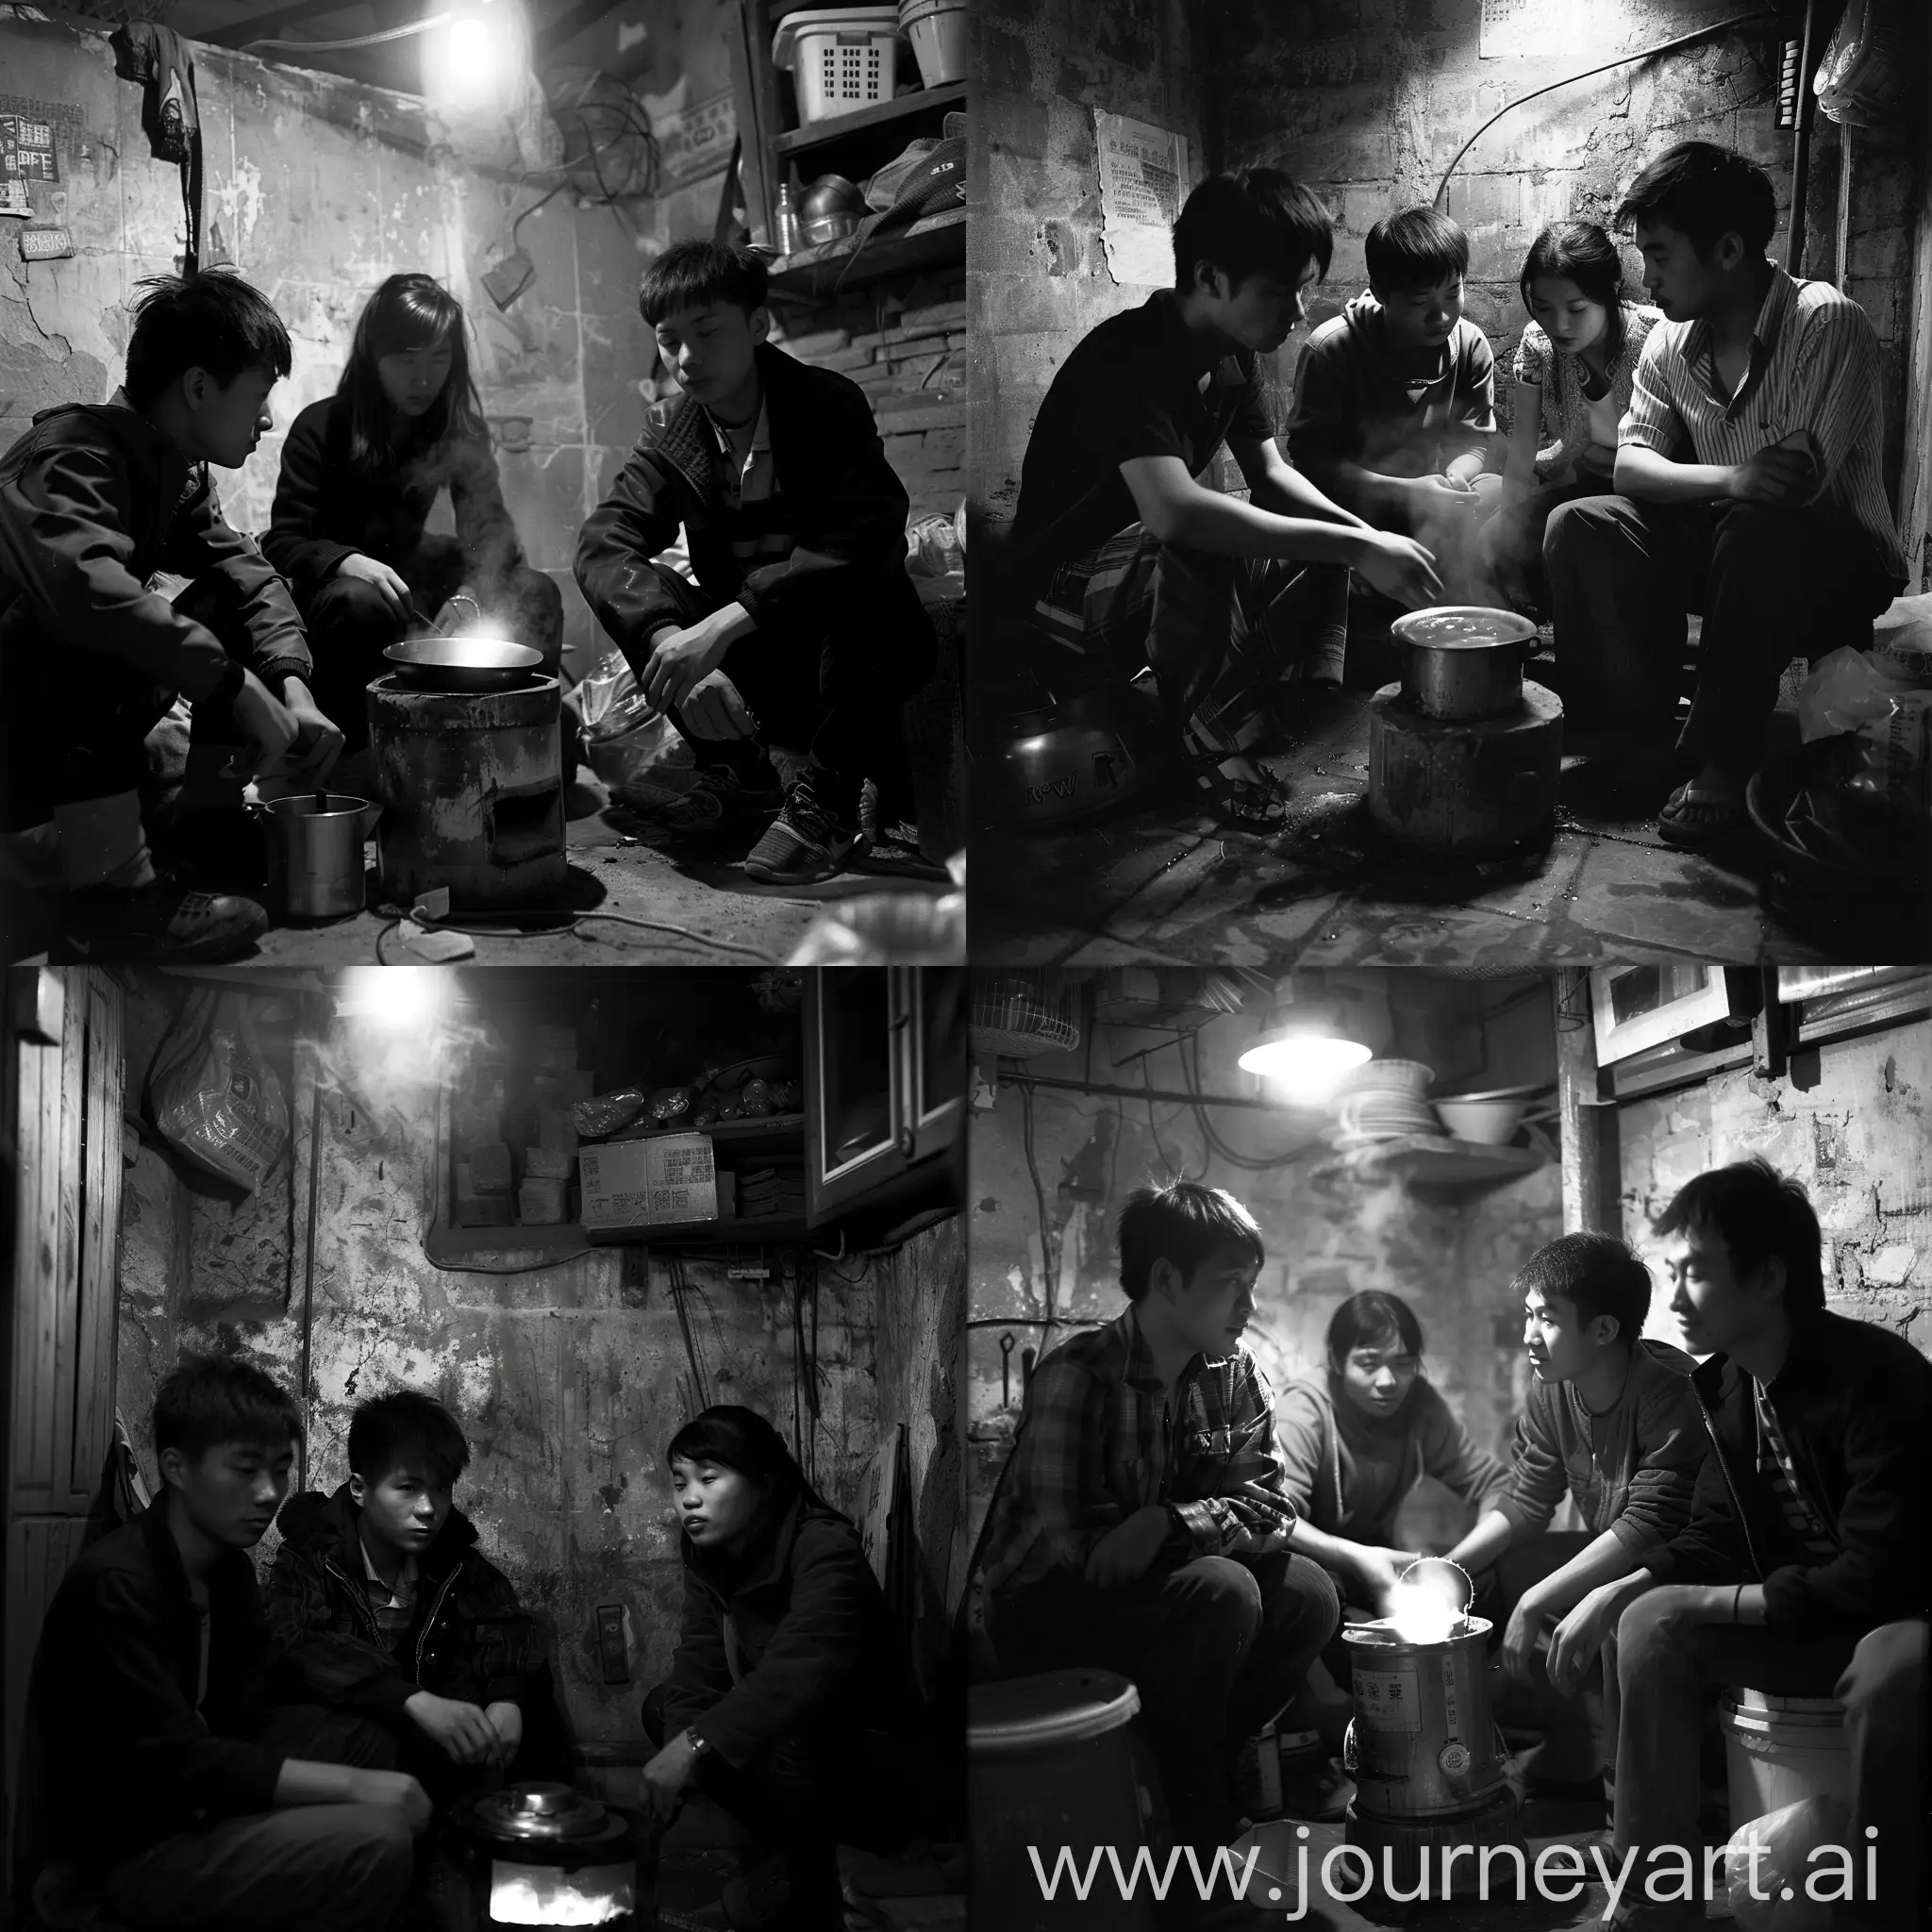 Urban-Youths-in-Shanghai-Dimly-Lit-Room-and-Steaming-Stove